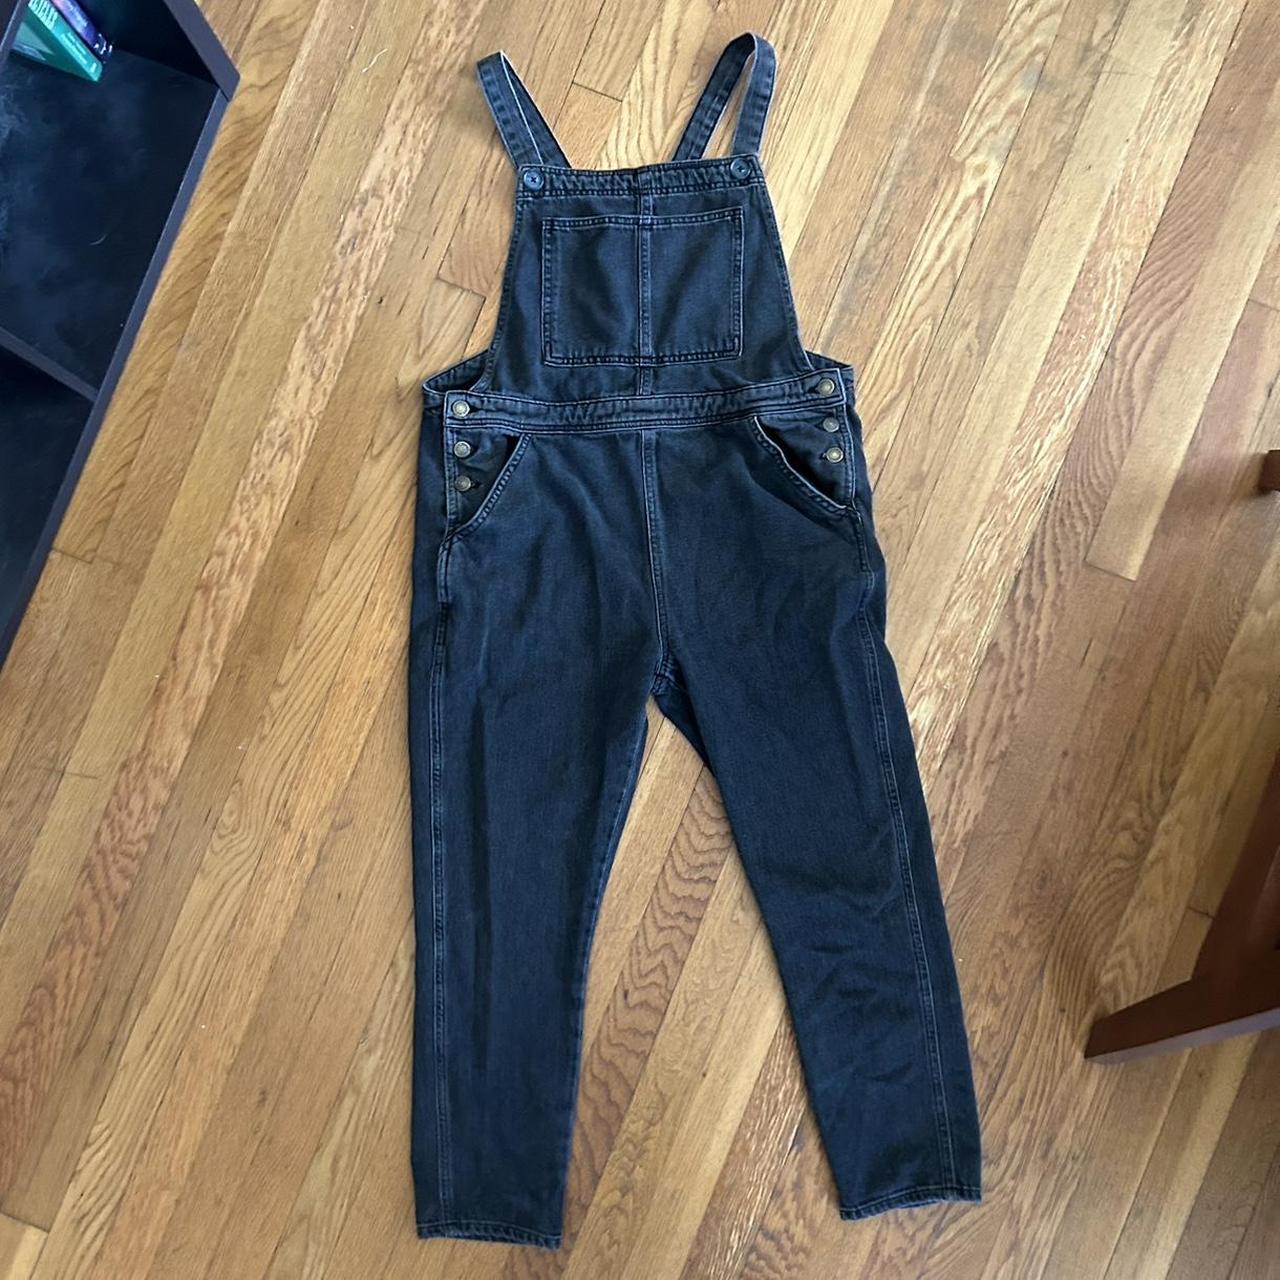 Topshop patchwork denim dungaree in mid blue - ShopStyle Jumpsuits & Rompers